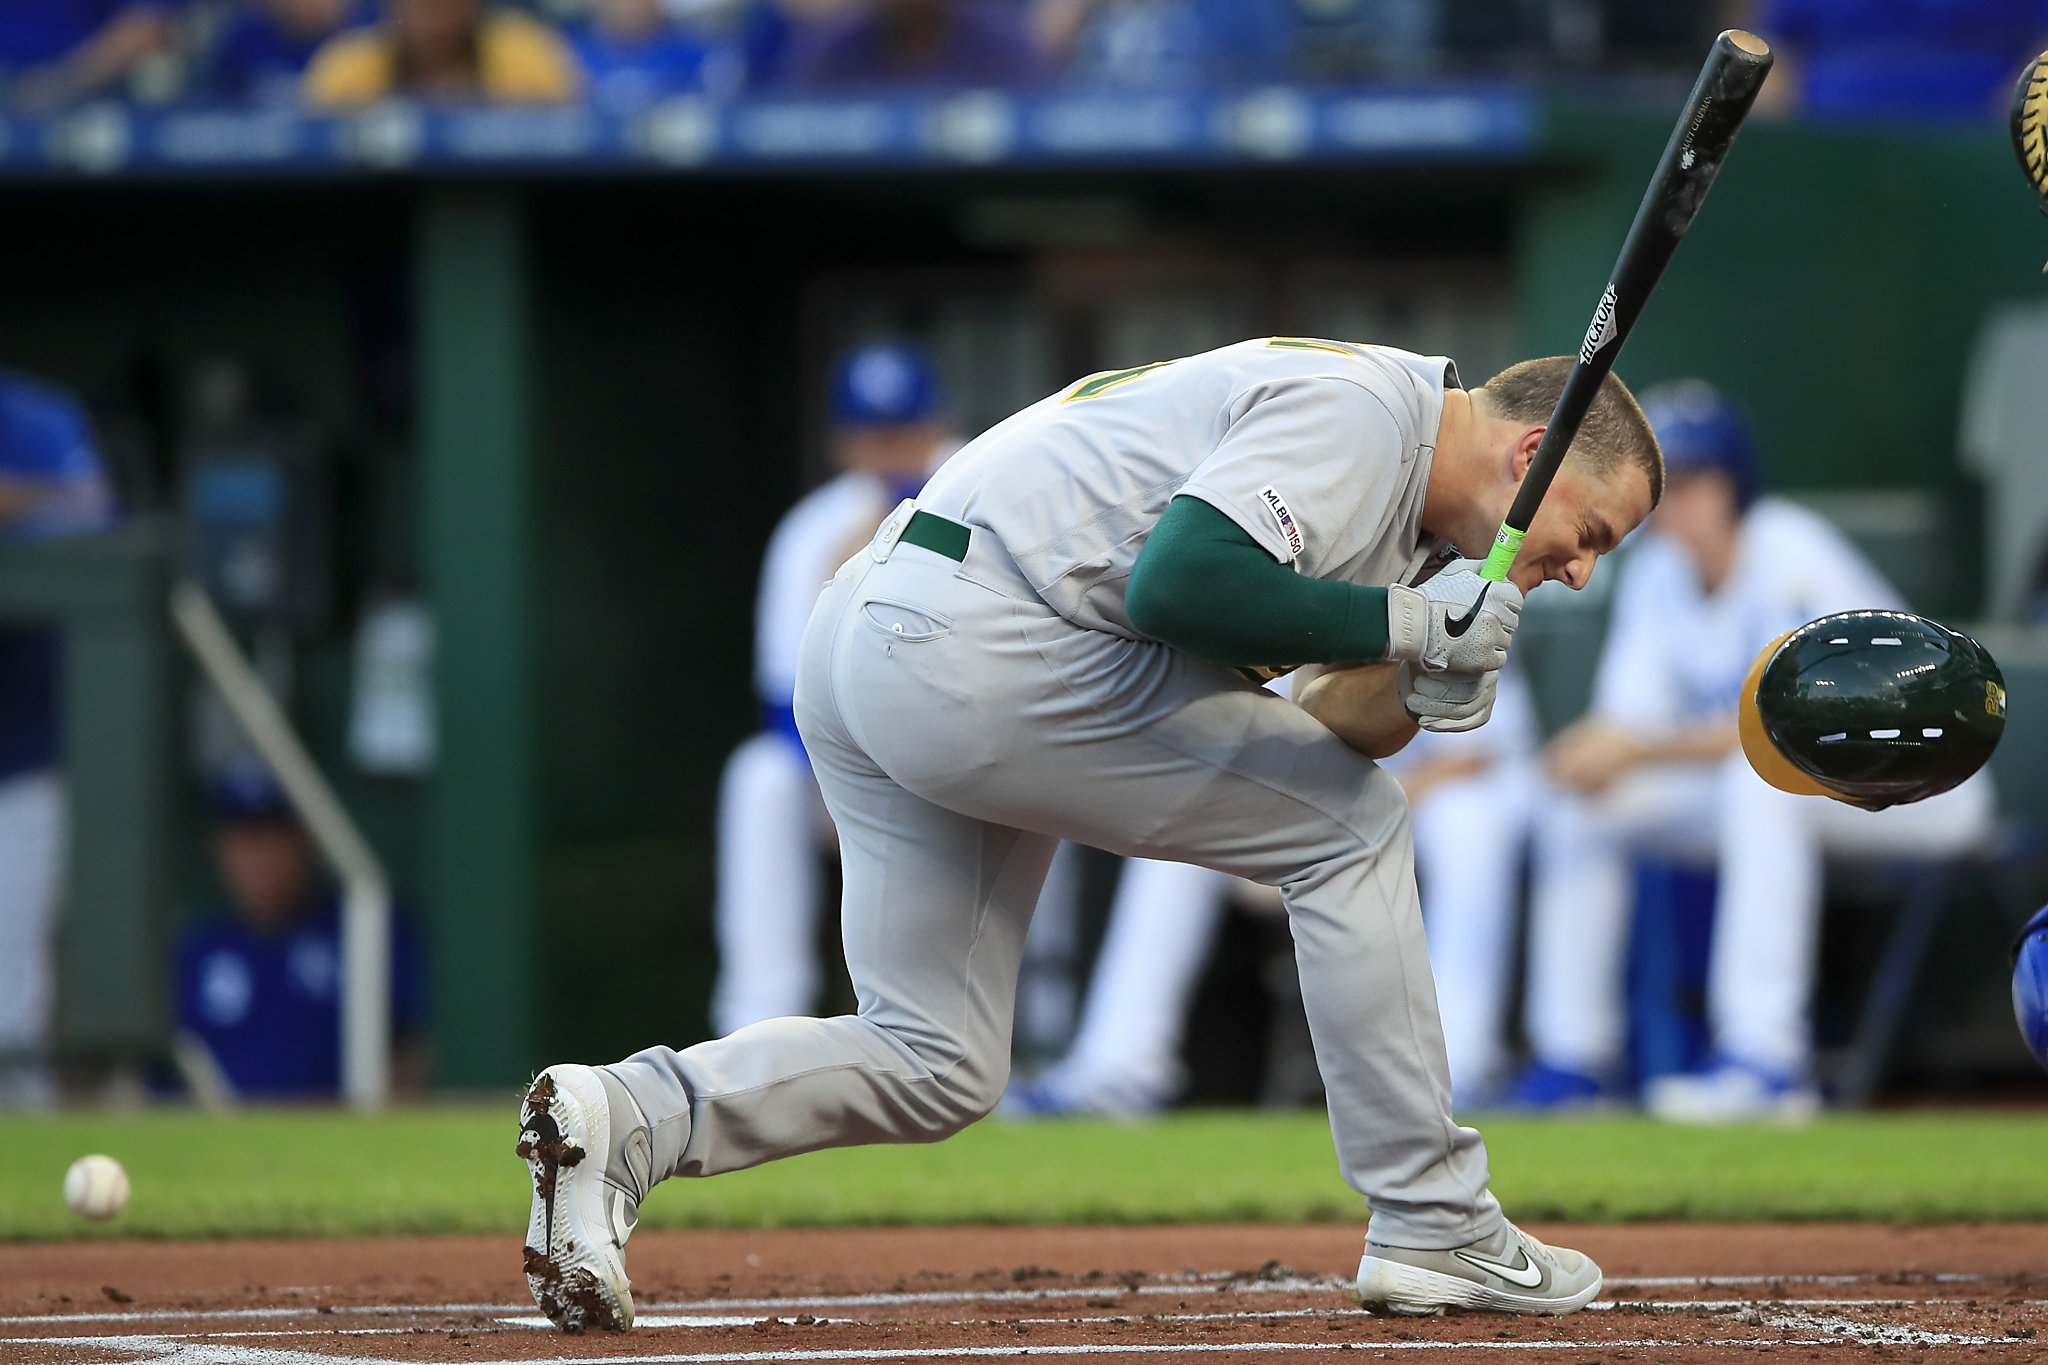 Matt Chapman can't buy a hit. The nerd stats are on his side